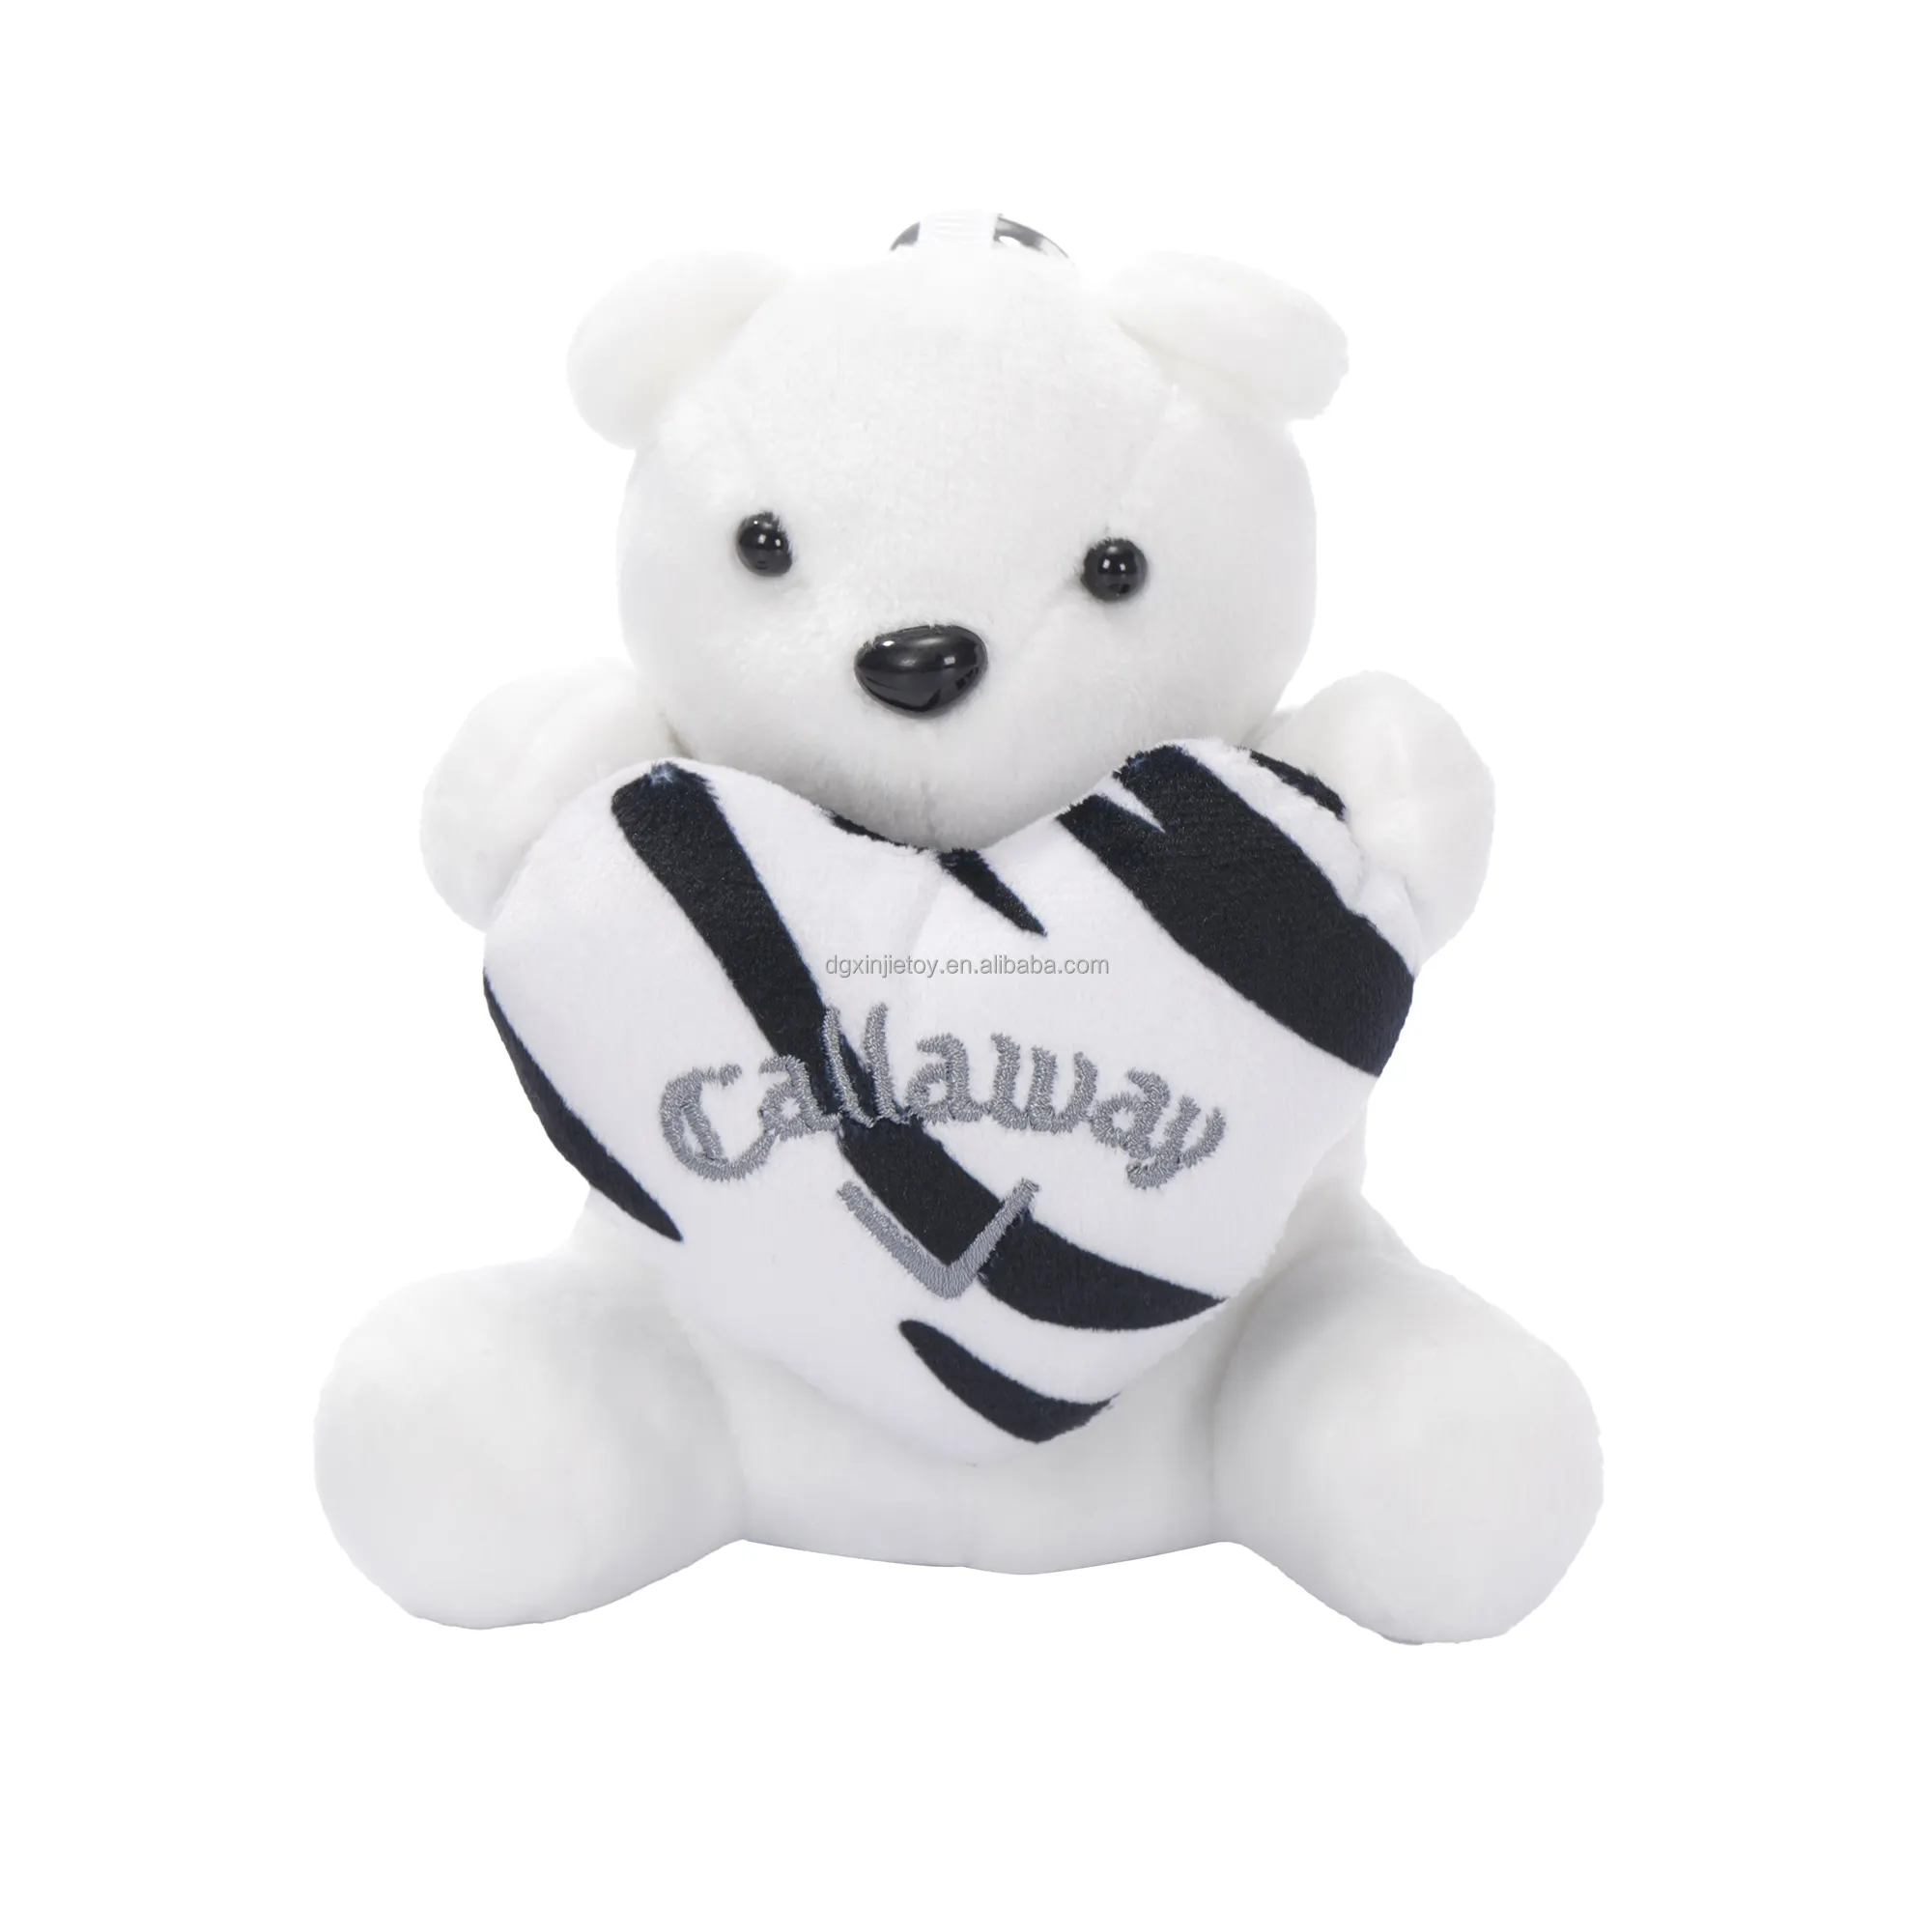 Custom 10 cm and above stuffed animal toy key chain Little white Teddy Bear pendant with a love bear pillow in his hand